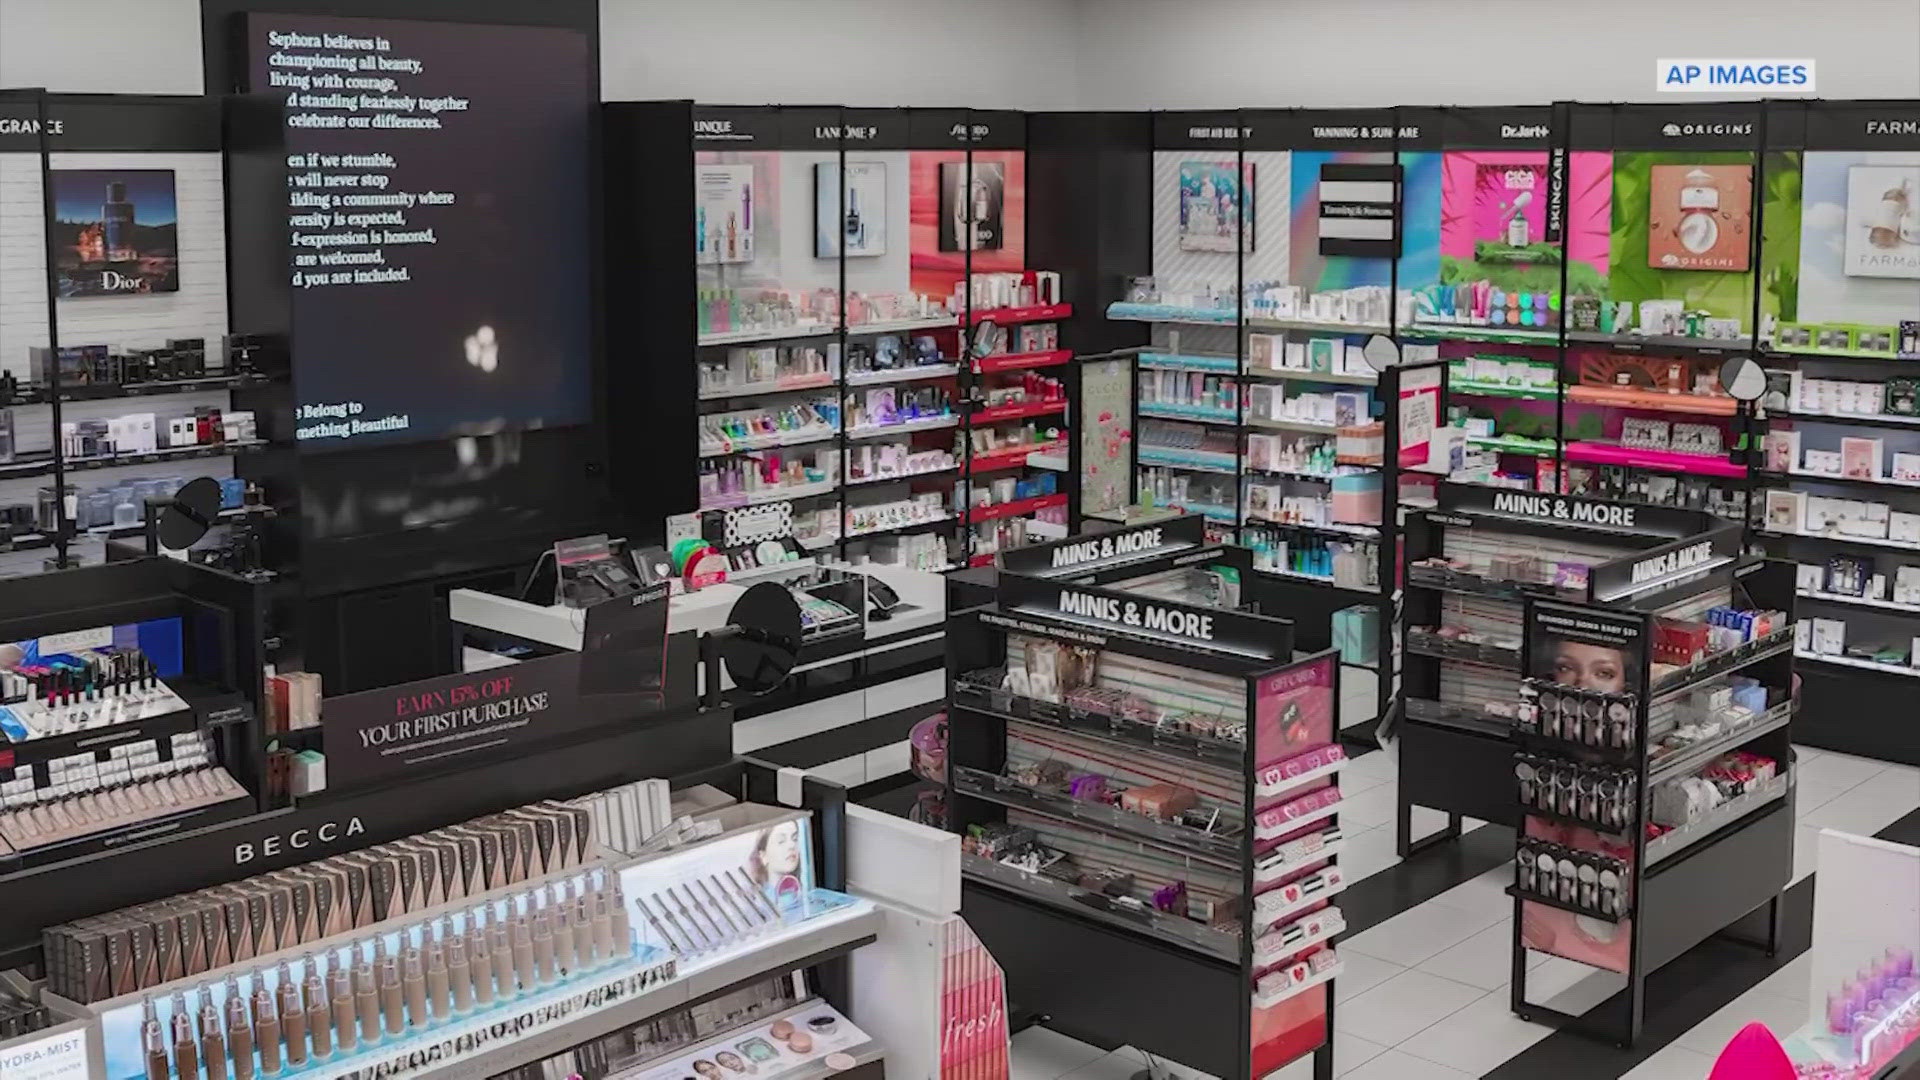 There are some pre-teens known as "Sephora Kids" who are getting products that could be risky for their age.